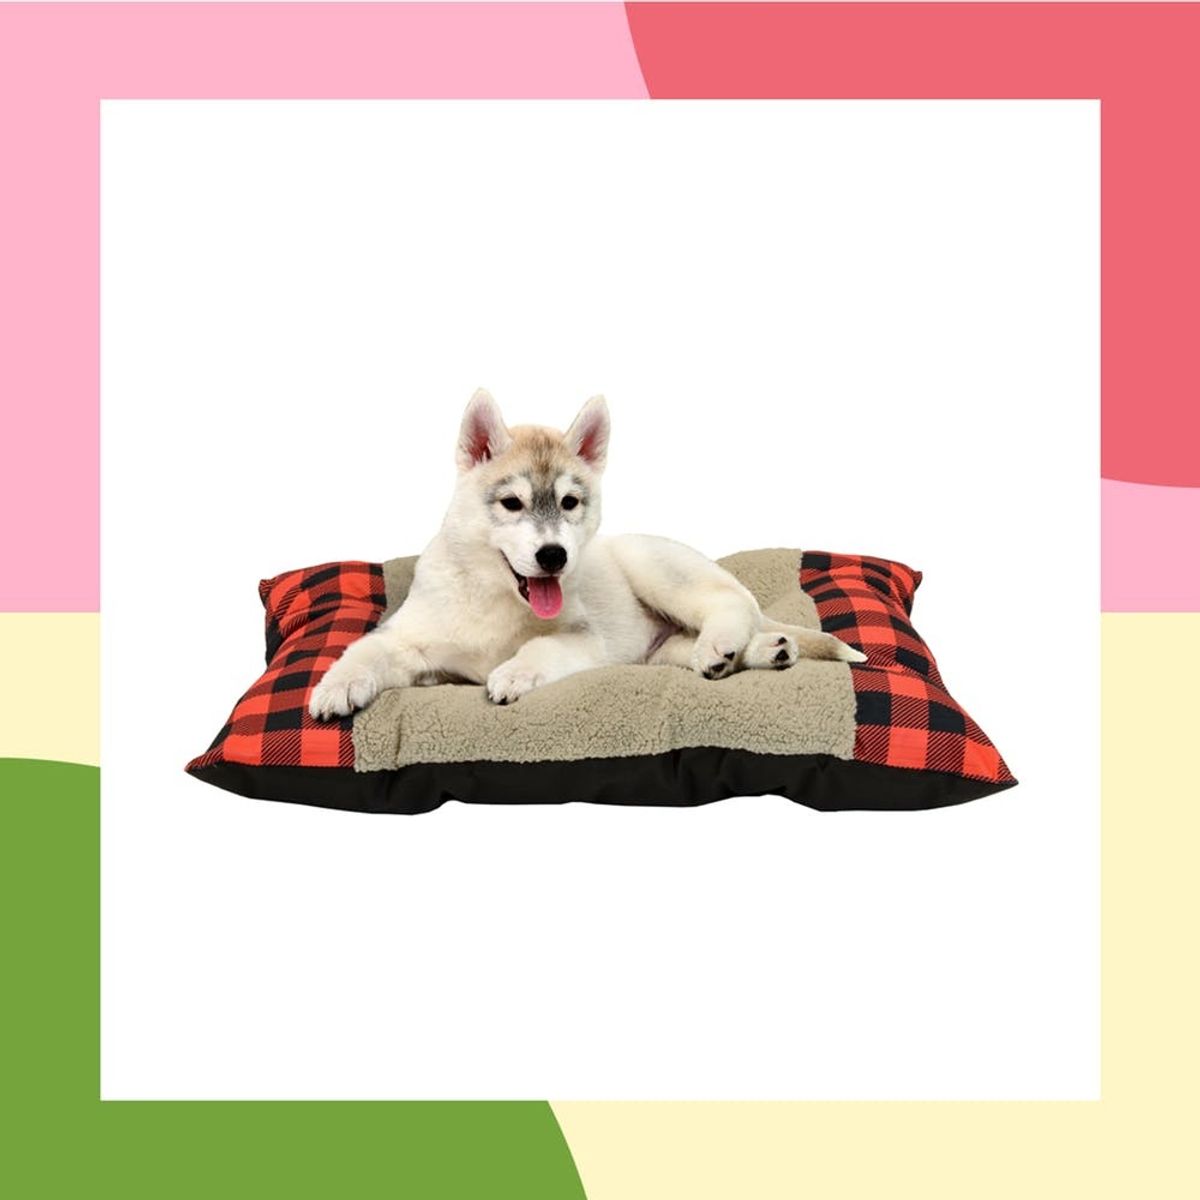 30 Pet Beds That Won’t Ruin Your Home Decor